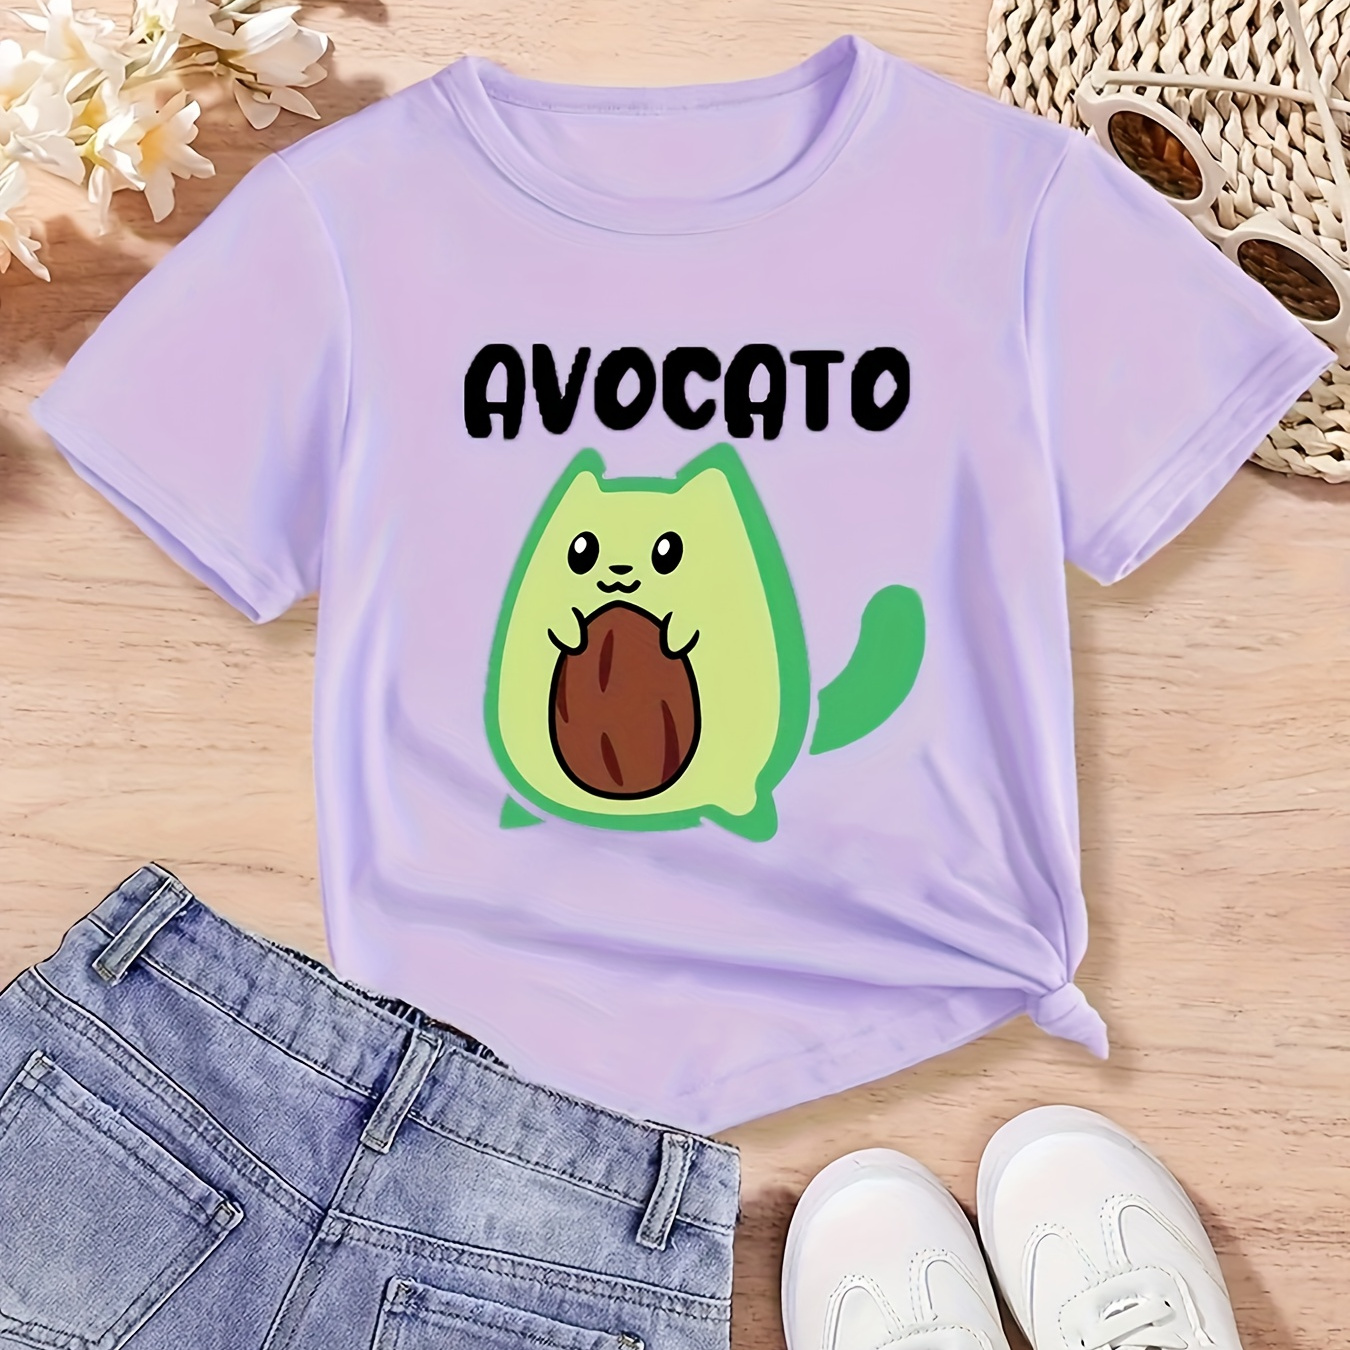 

Cute Avocado Print Girls Fashion Graphic T-shirt, Comfy Crew Neck Short Sleeve Casual Tee For Summer